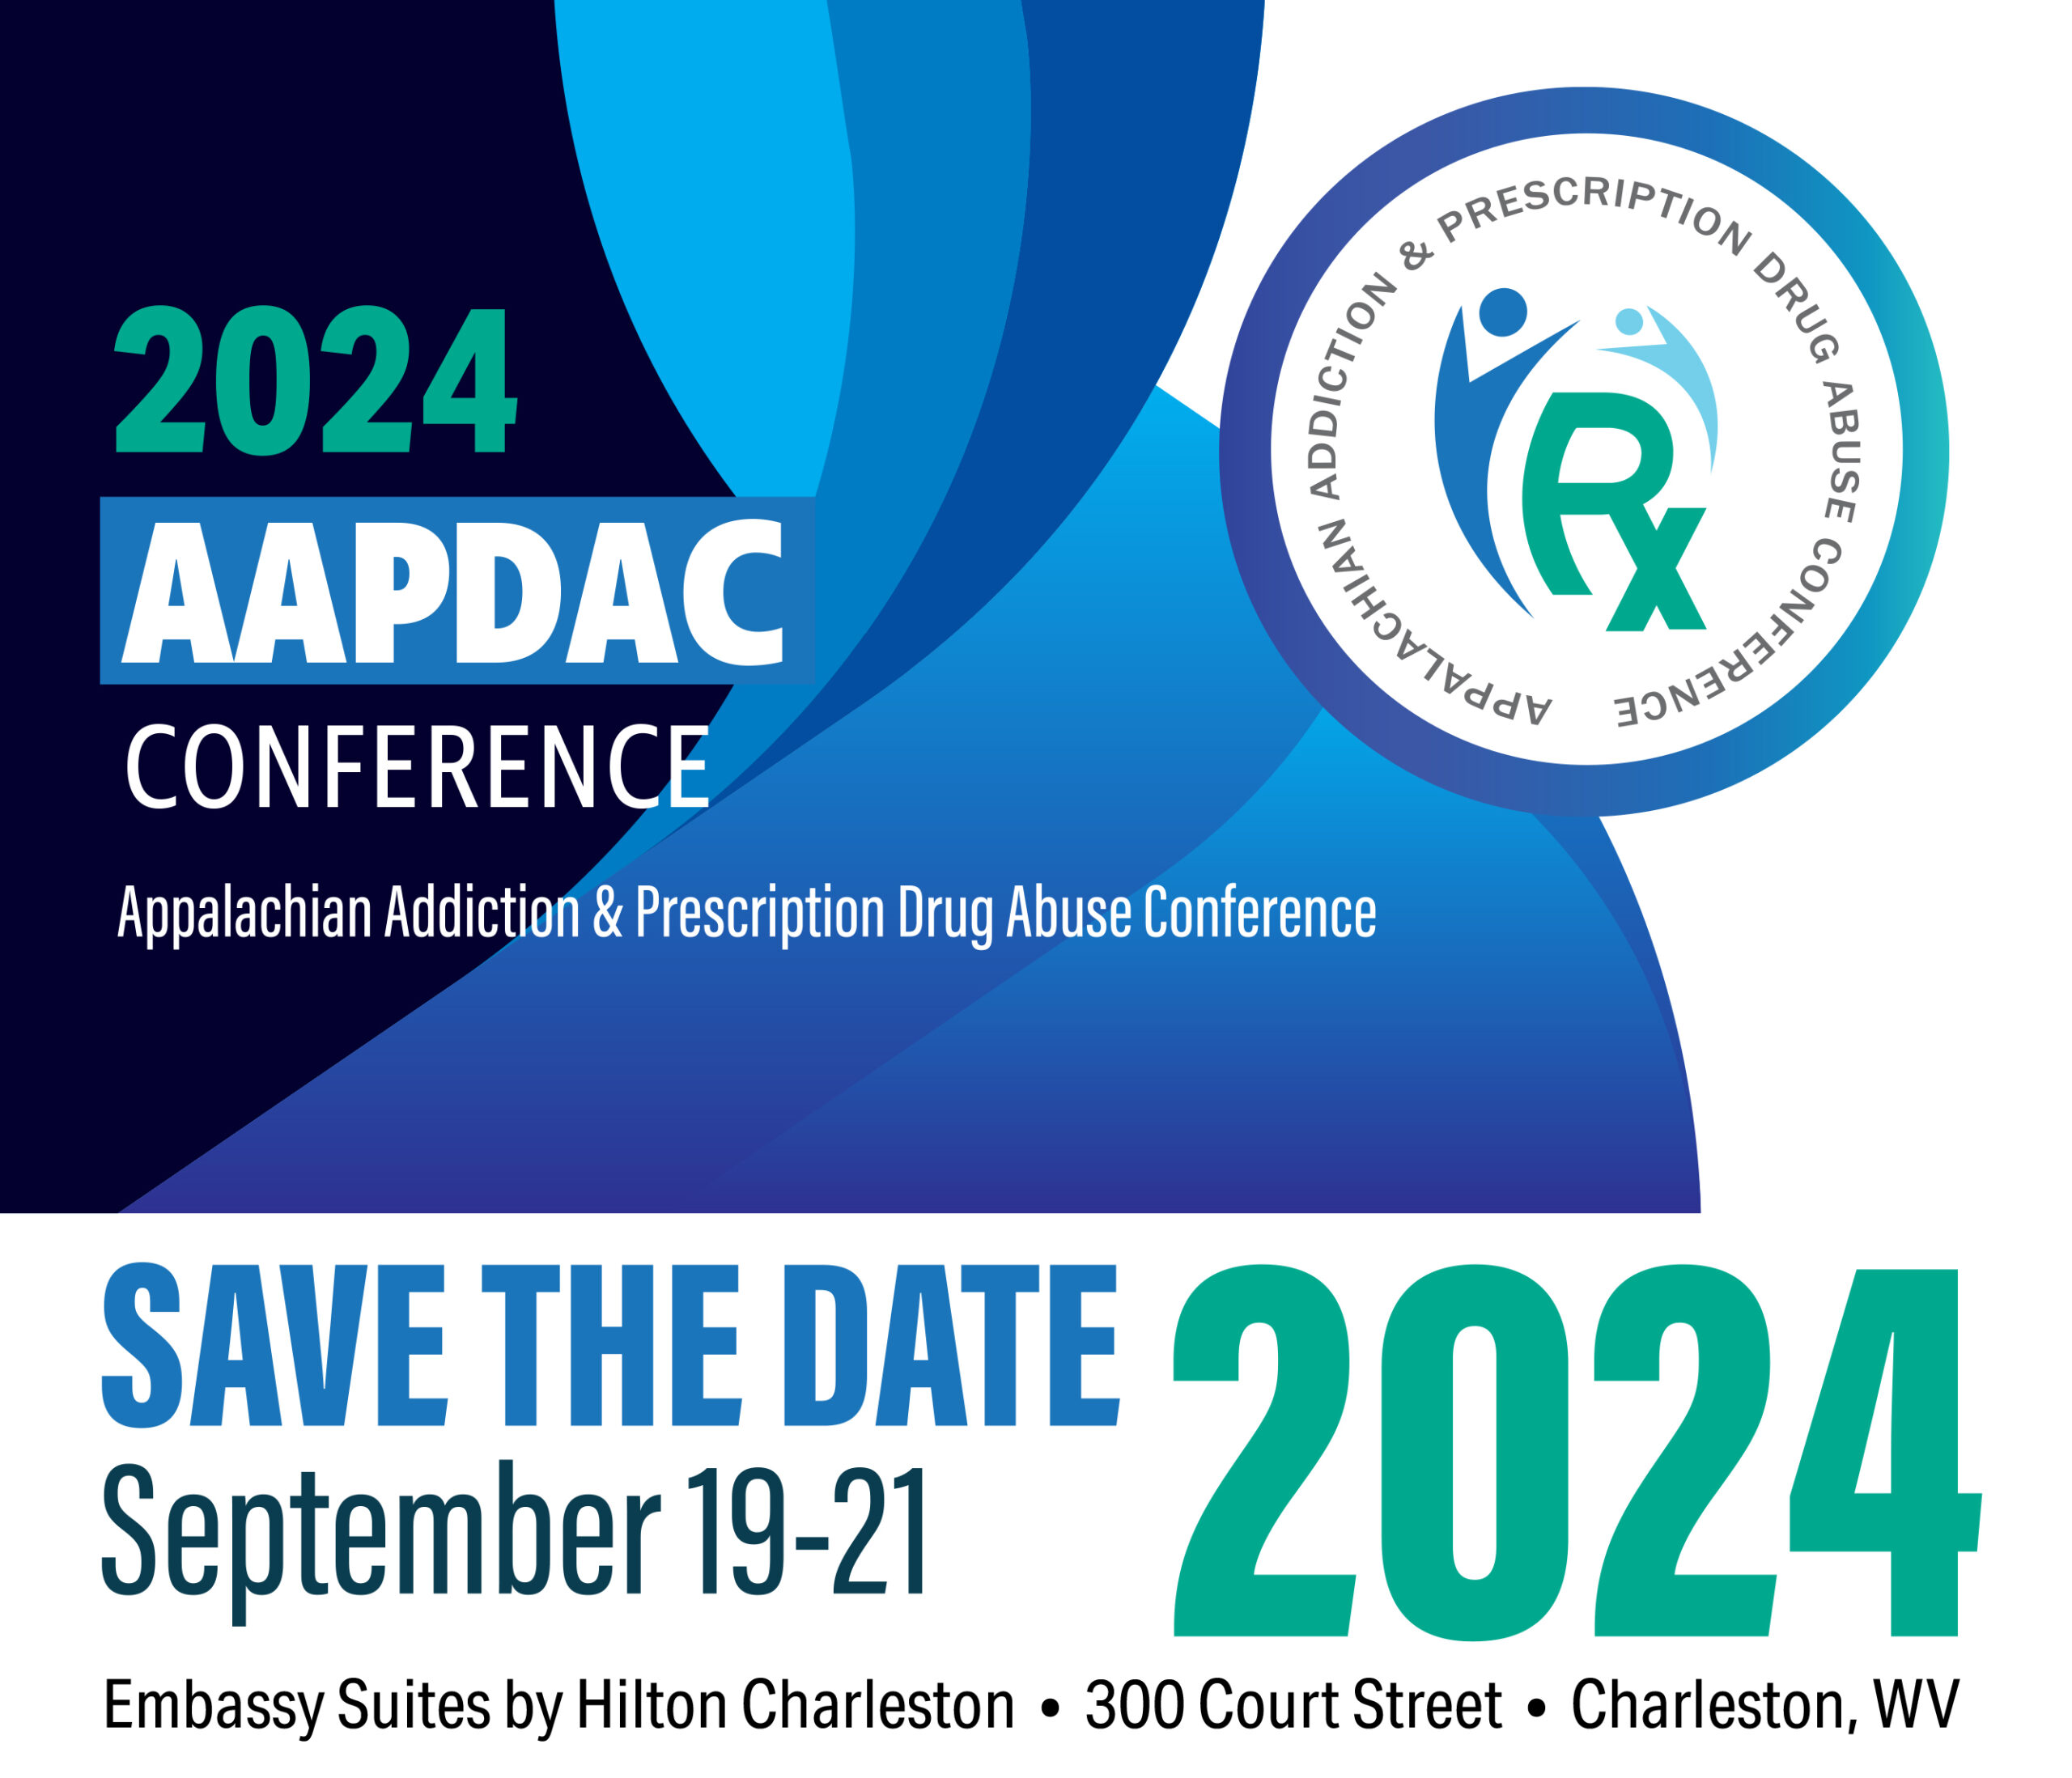 2024 AAPDAC Save the Date / October 5-7, 2023